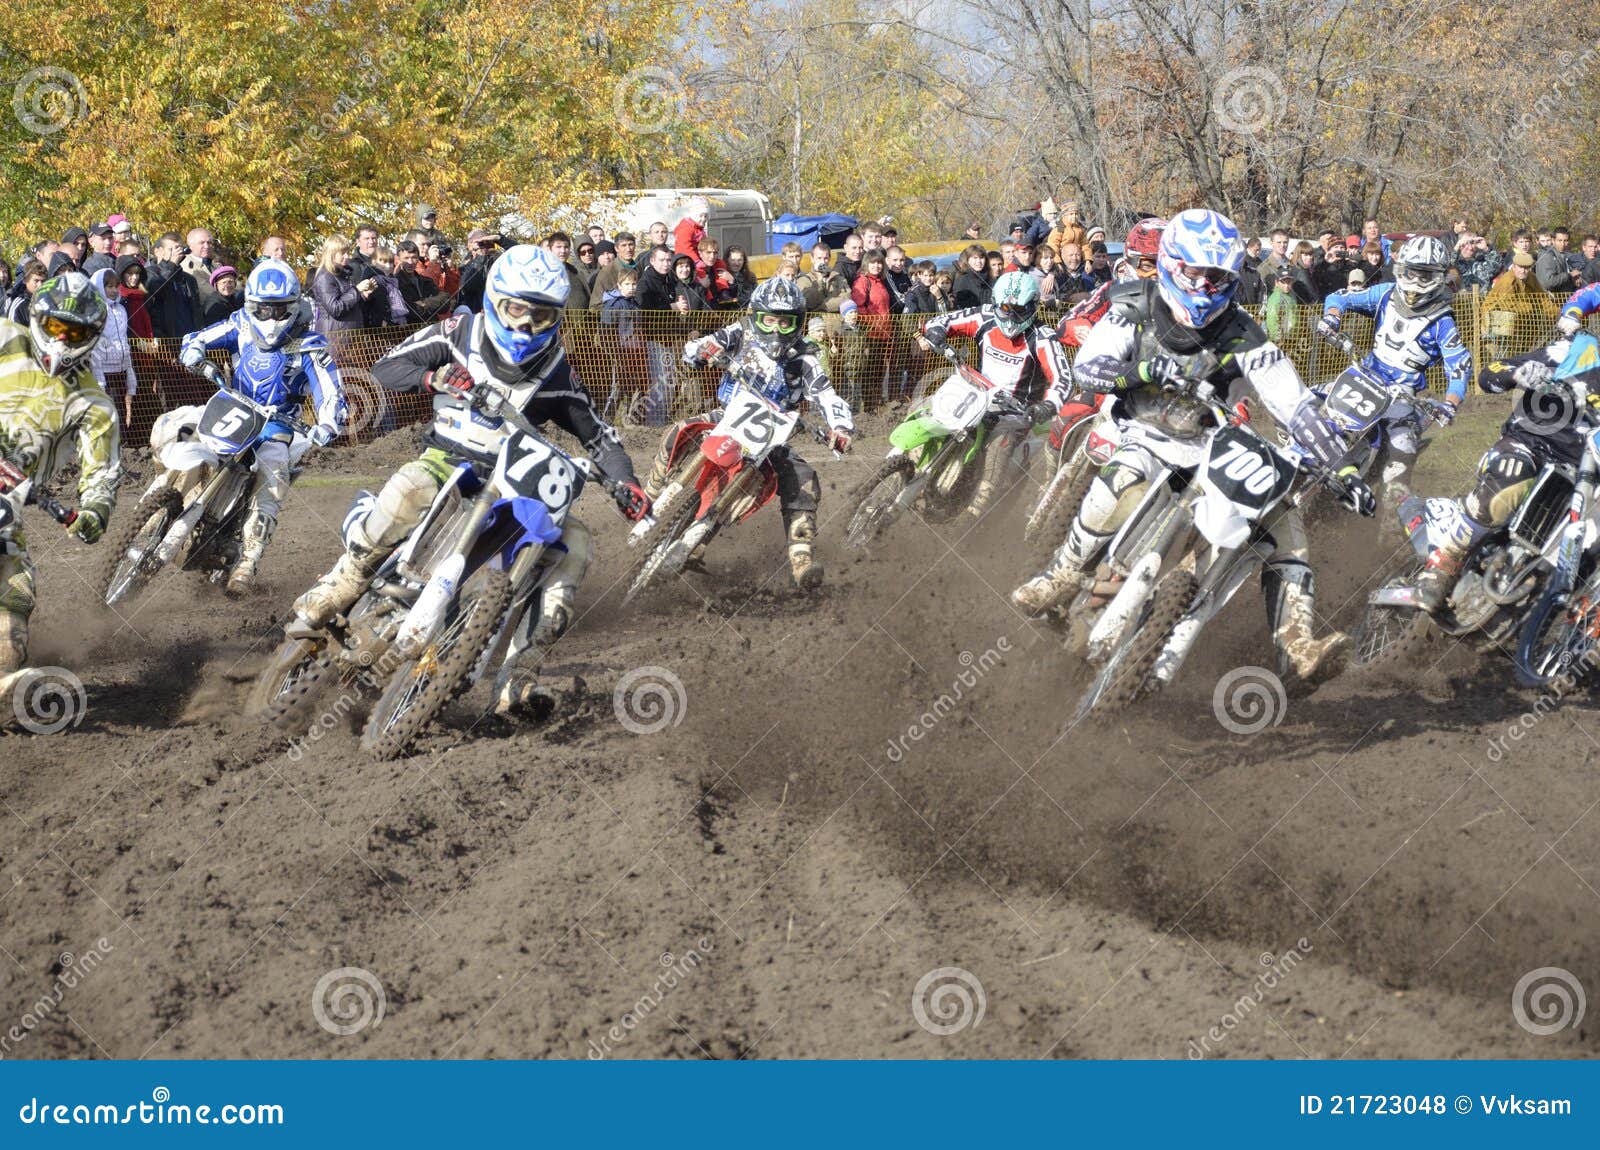 Start motocross, a group of motorbike racing. RUSSIA, SAMARA, CHAPAYEVSK - OCTOBER 17: Start, a group of motorbike racing in the MX2 class competition in the first corner the Open Cup Volga motocross on October 17, 2011 in Chapayevsk, Samara, Russia